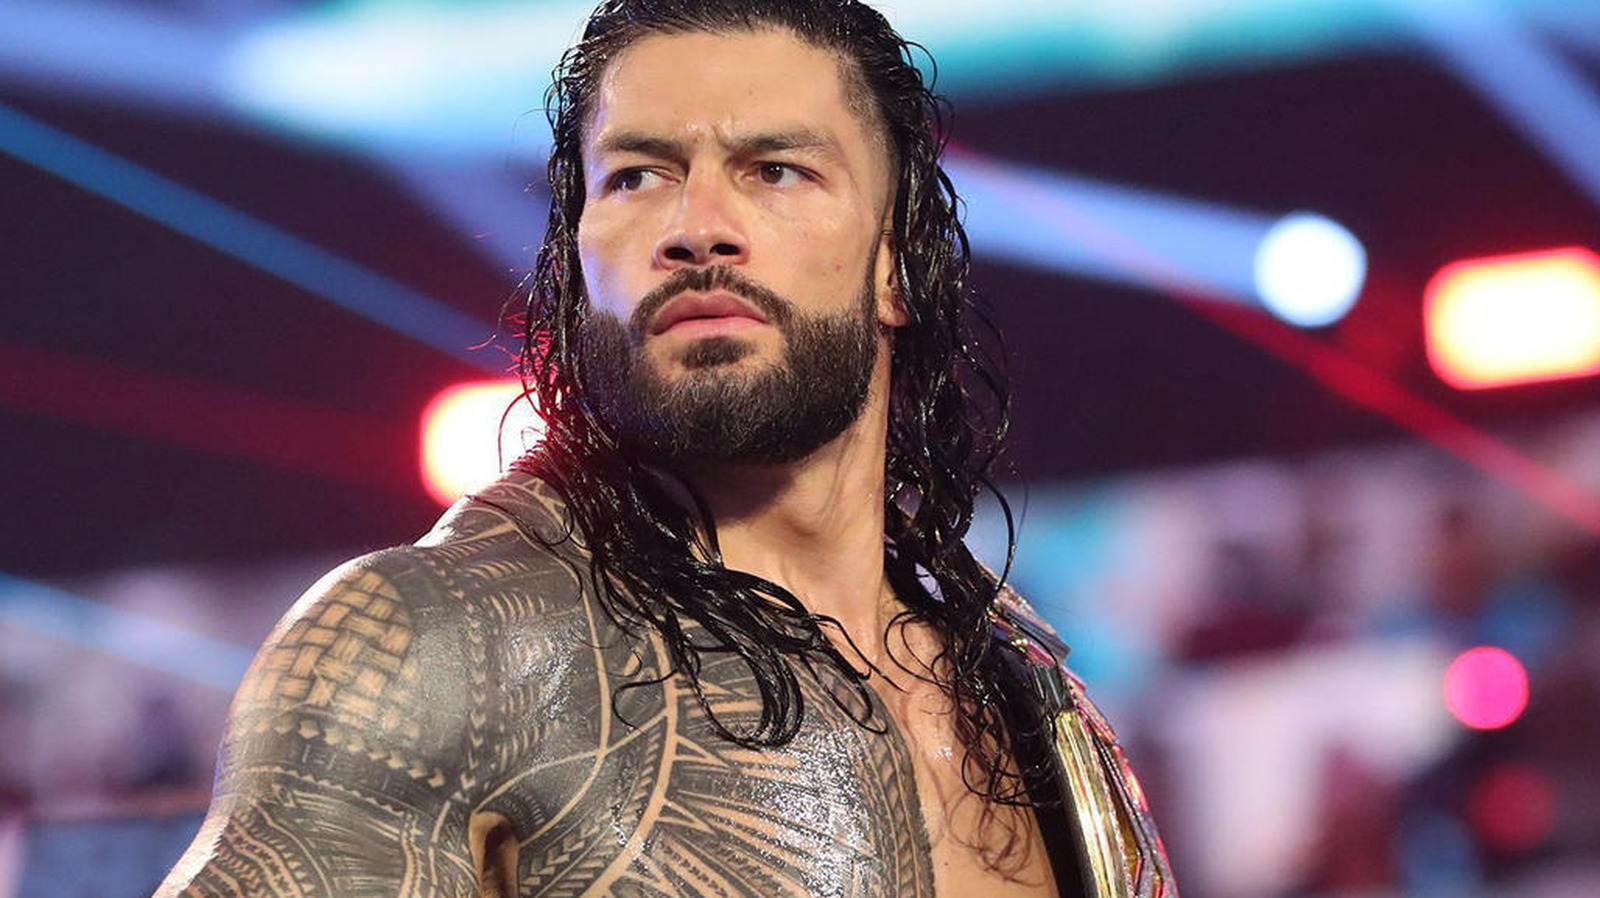 Backstage News On Original Plans For Roman Reigns' Opponent At WWE